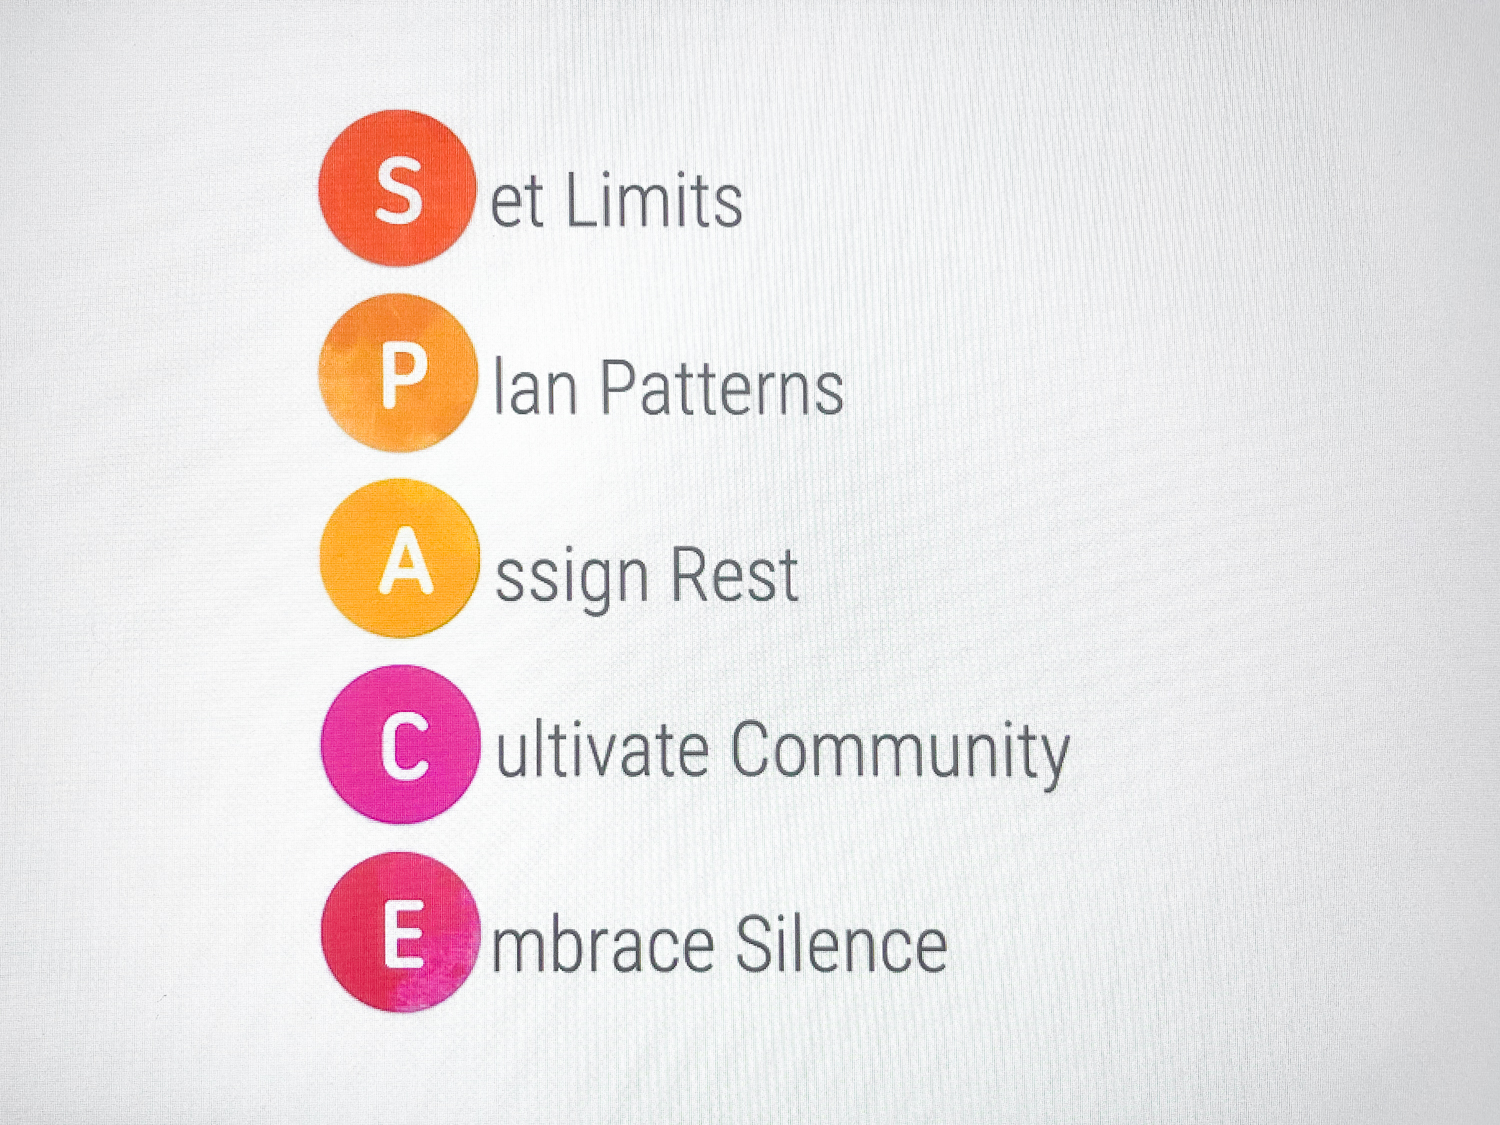 The five principles of SPACE: • Setting limits • Planning patterns  • Assigning rest • Cultivating community  • Embracing silence